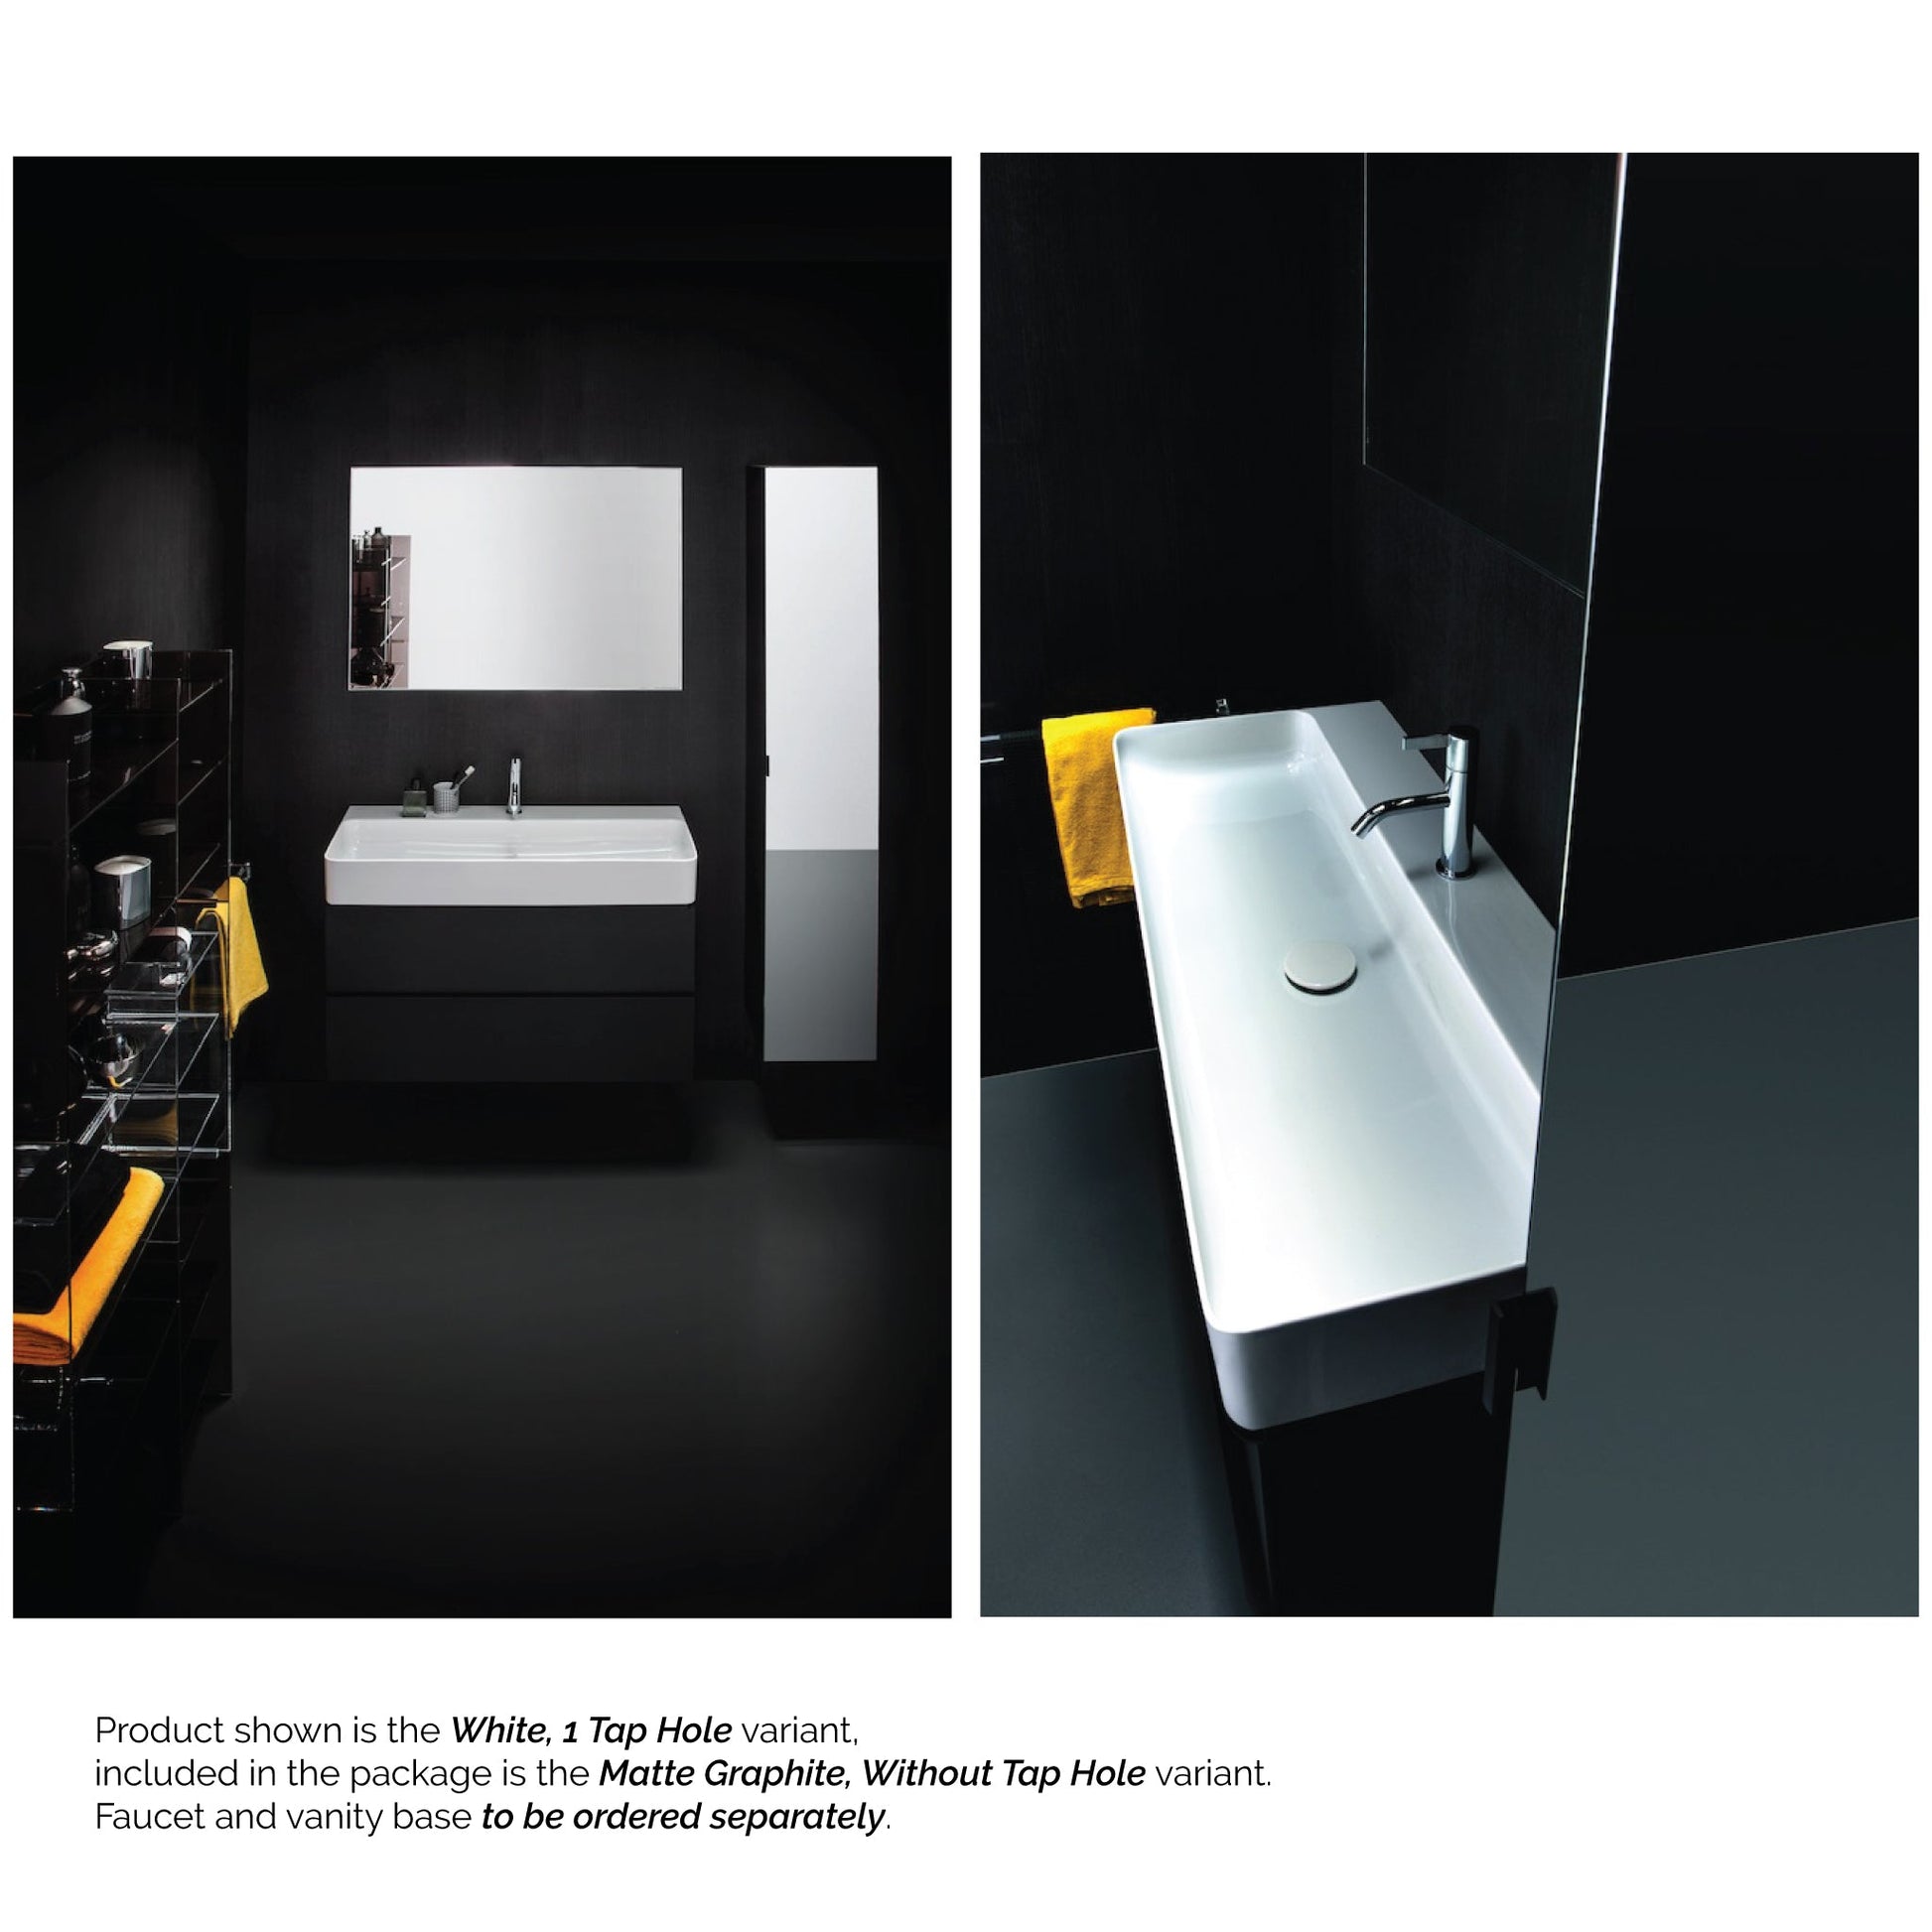 Laufen Val 37" x 17" Matte Graphite Ceramic Wall-Mounted Bathroom Sink Without Faucet Hole